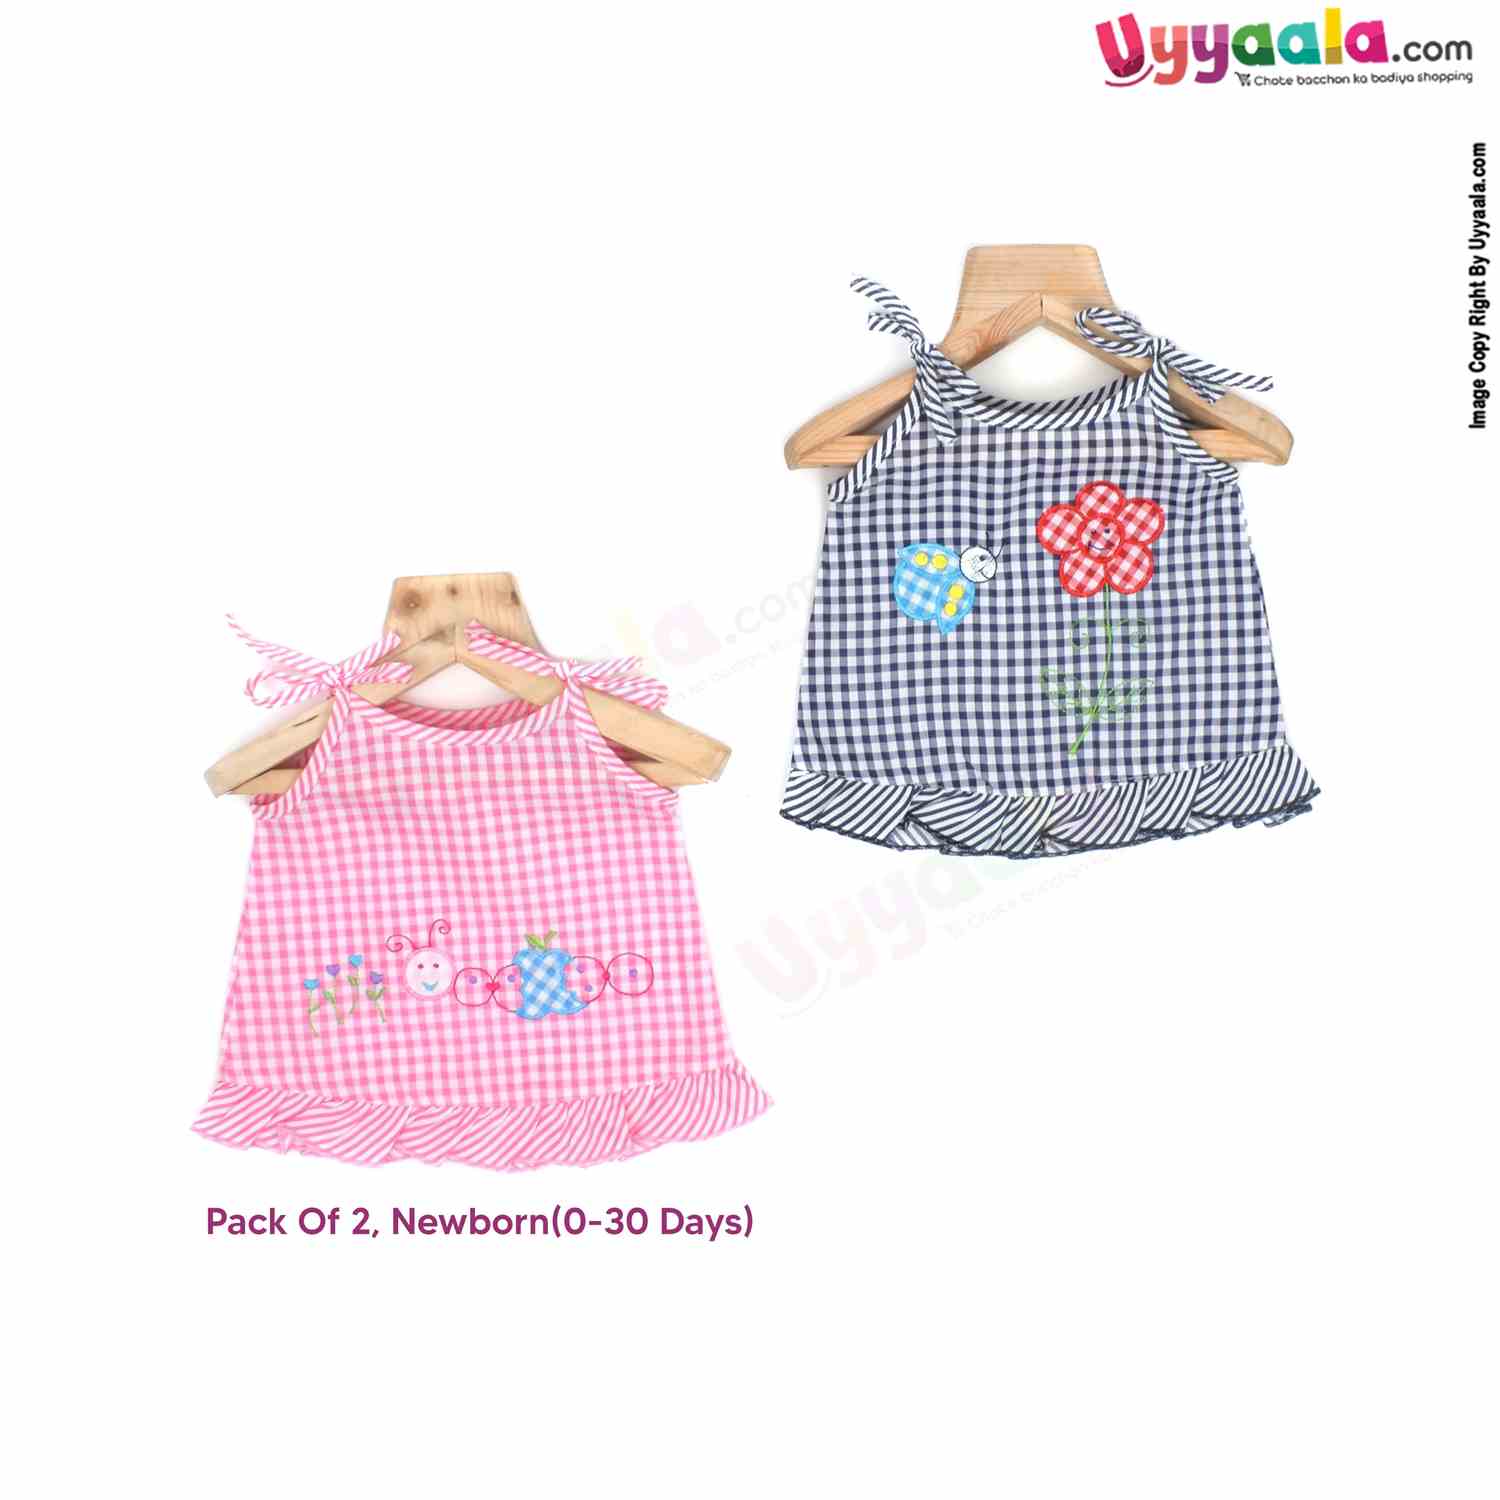 VOCAL BABY Sleeveless Newborn Baby Frock, Top Opening Tie Knot Lace Model, Premium Quality Cotton Baby Wear, Checks Print, Pink & Black - 2 Pack